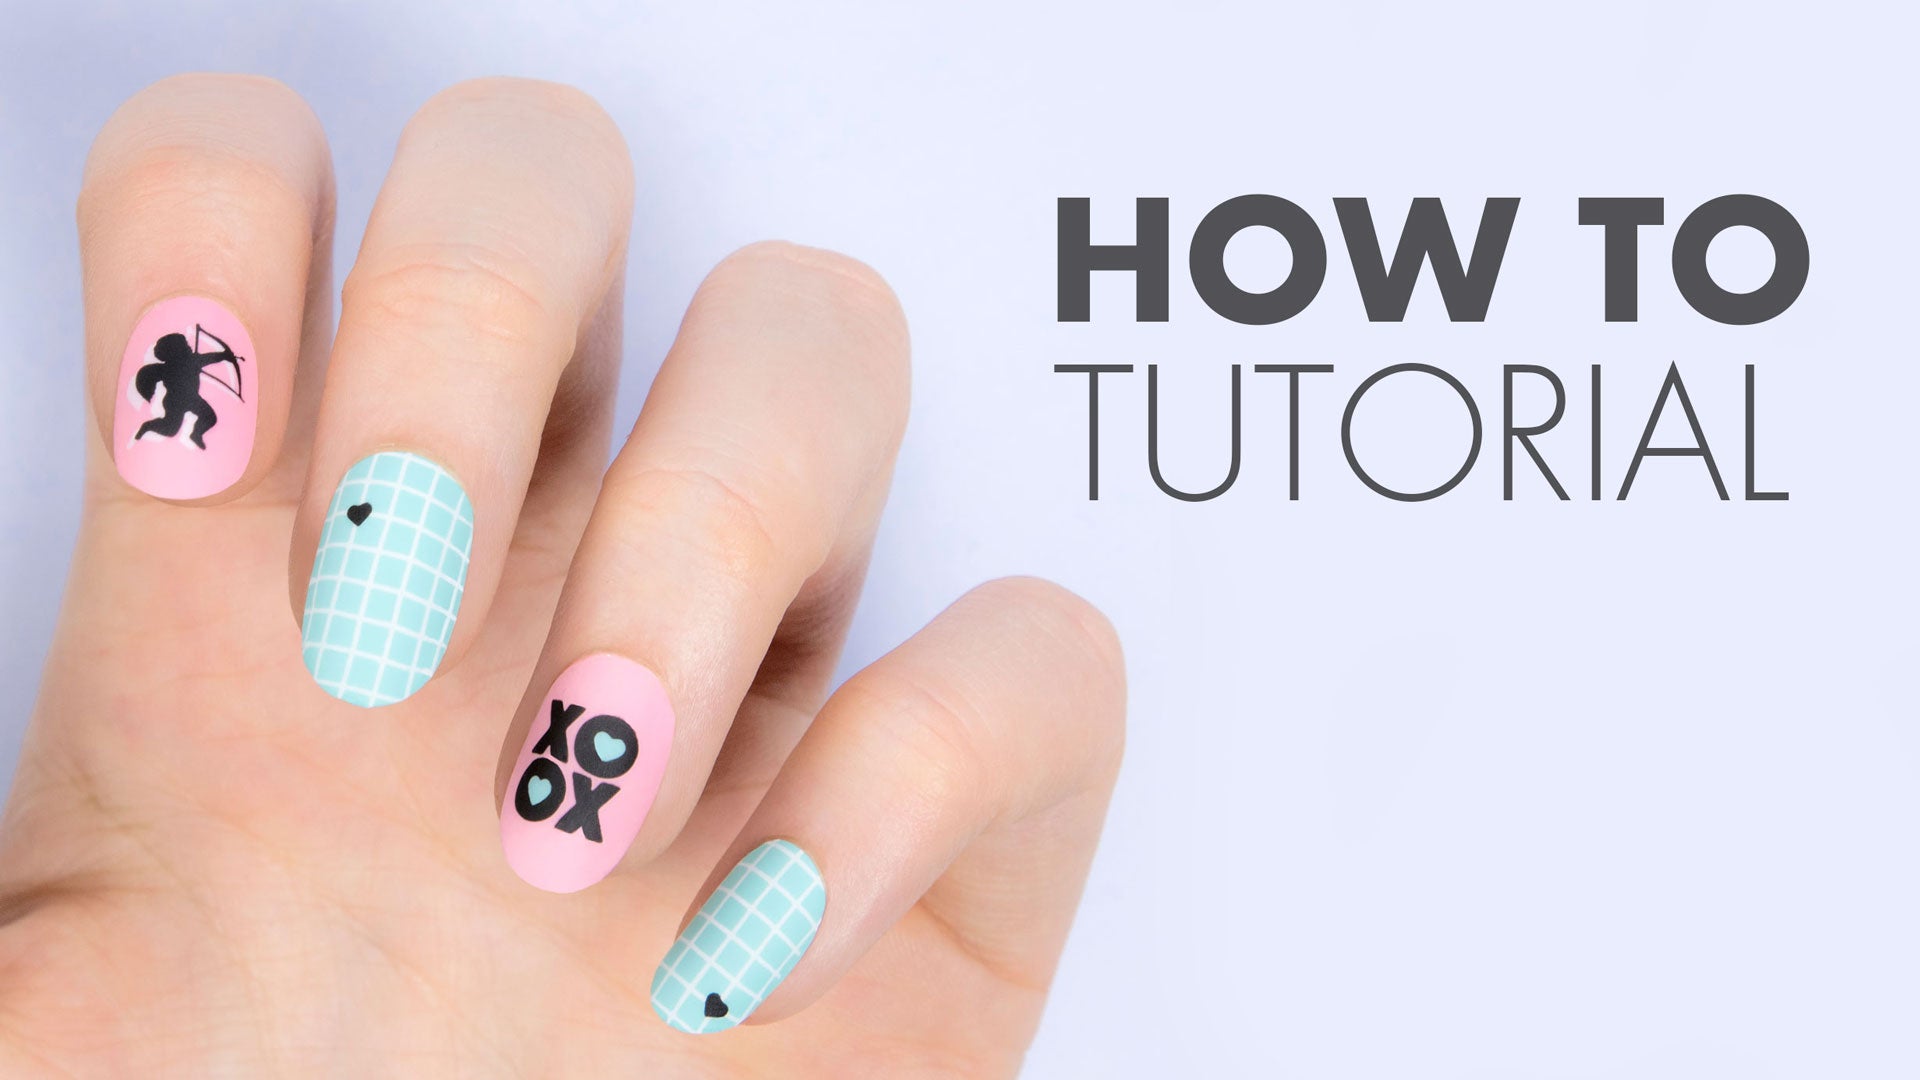 Load video: How to Apply Gel Nail Wraps